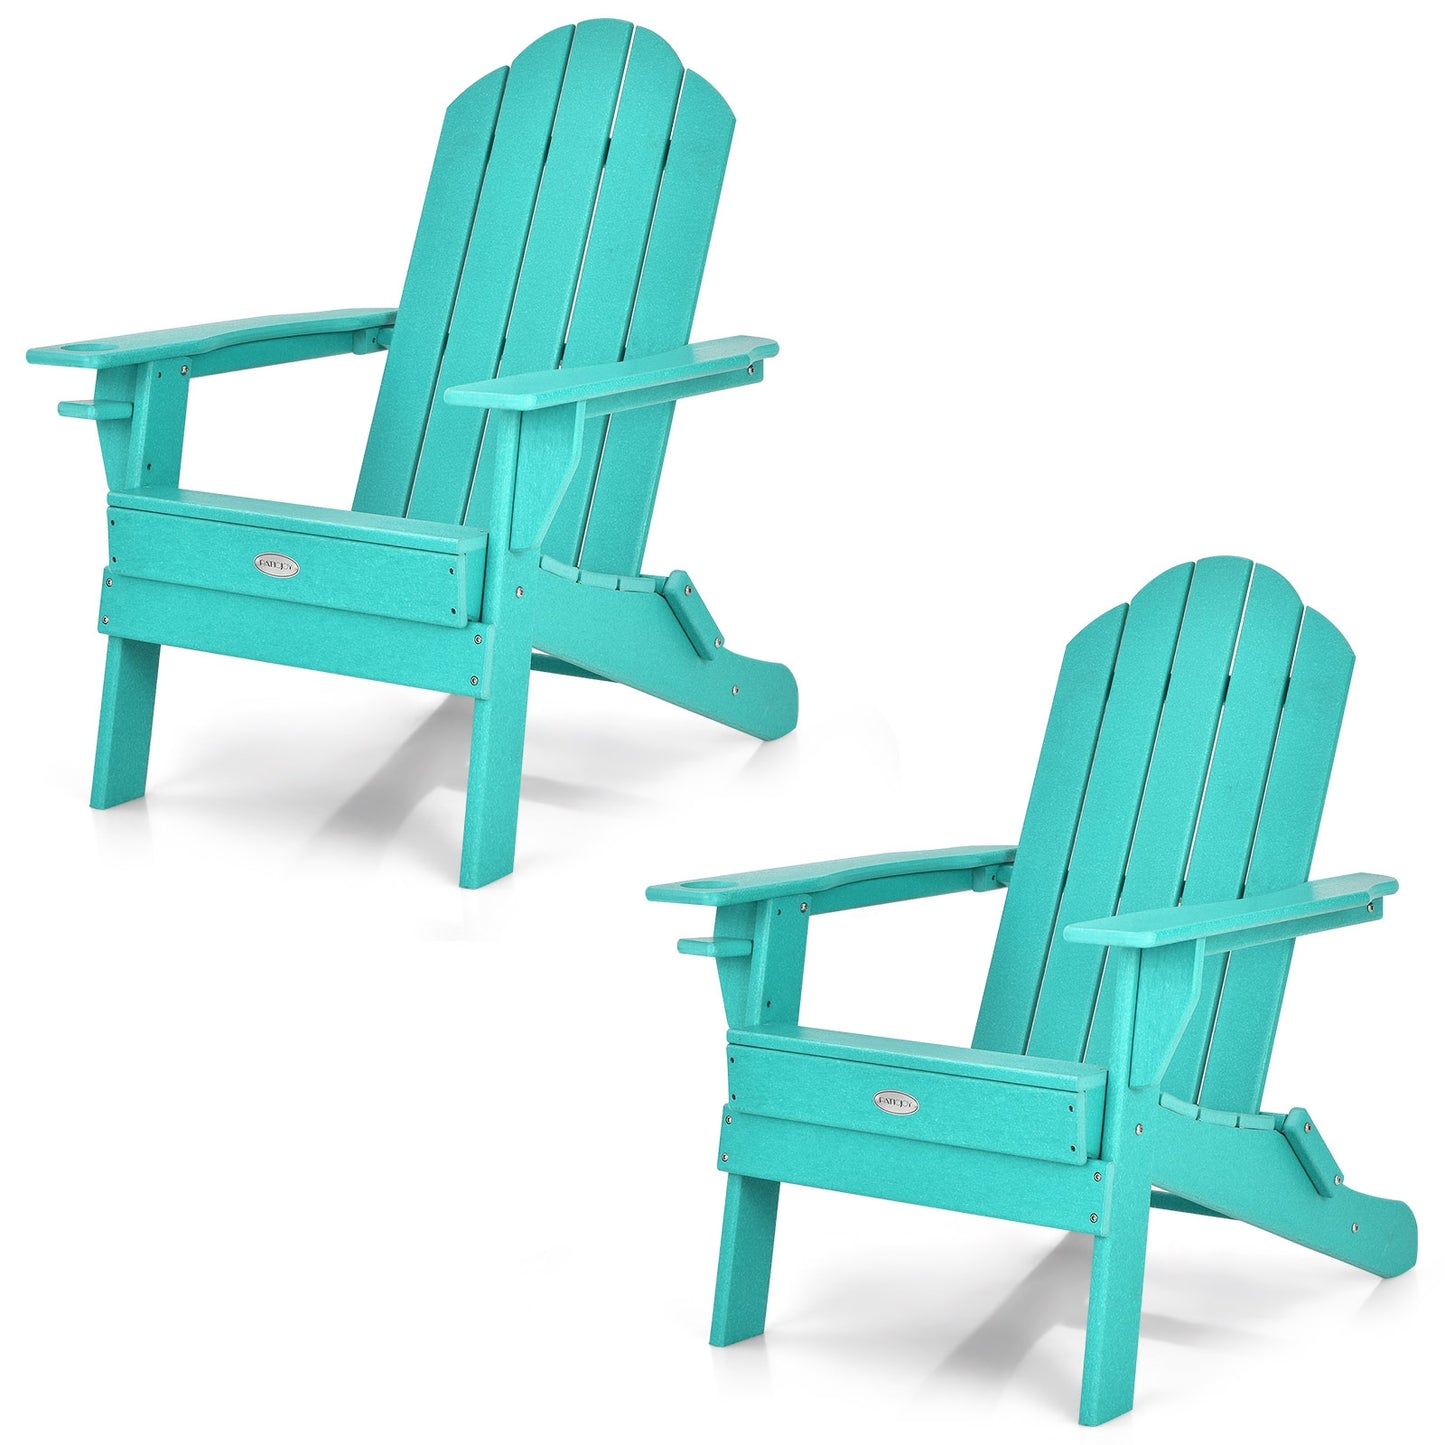 Foldable Weather Resistant Patio Chair with Built-in Cup Holder-Turquoise